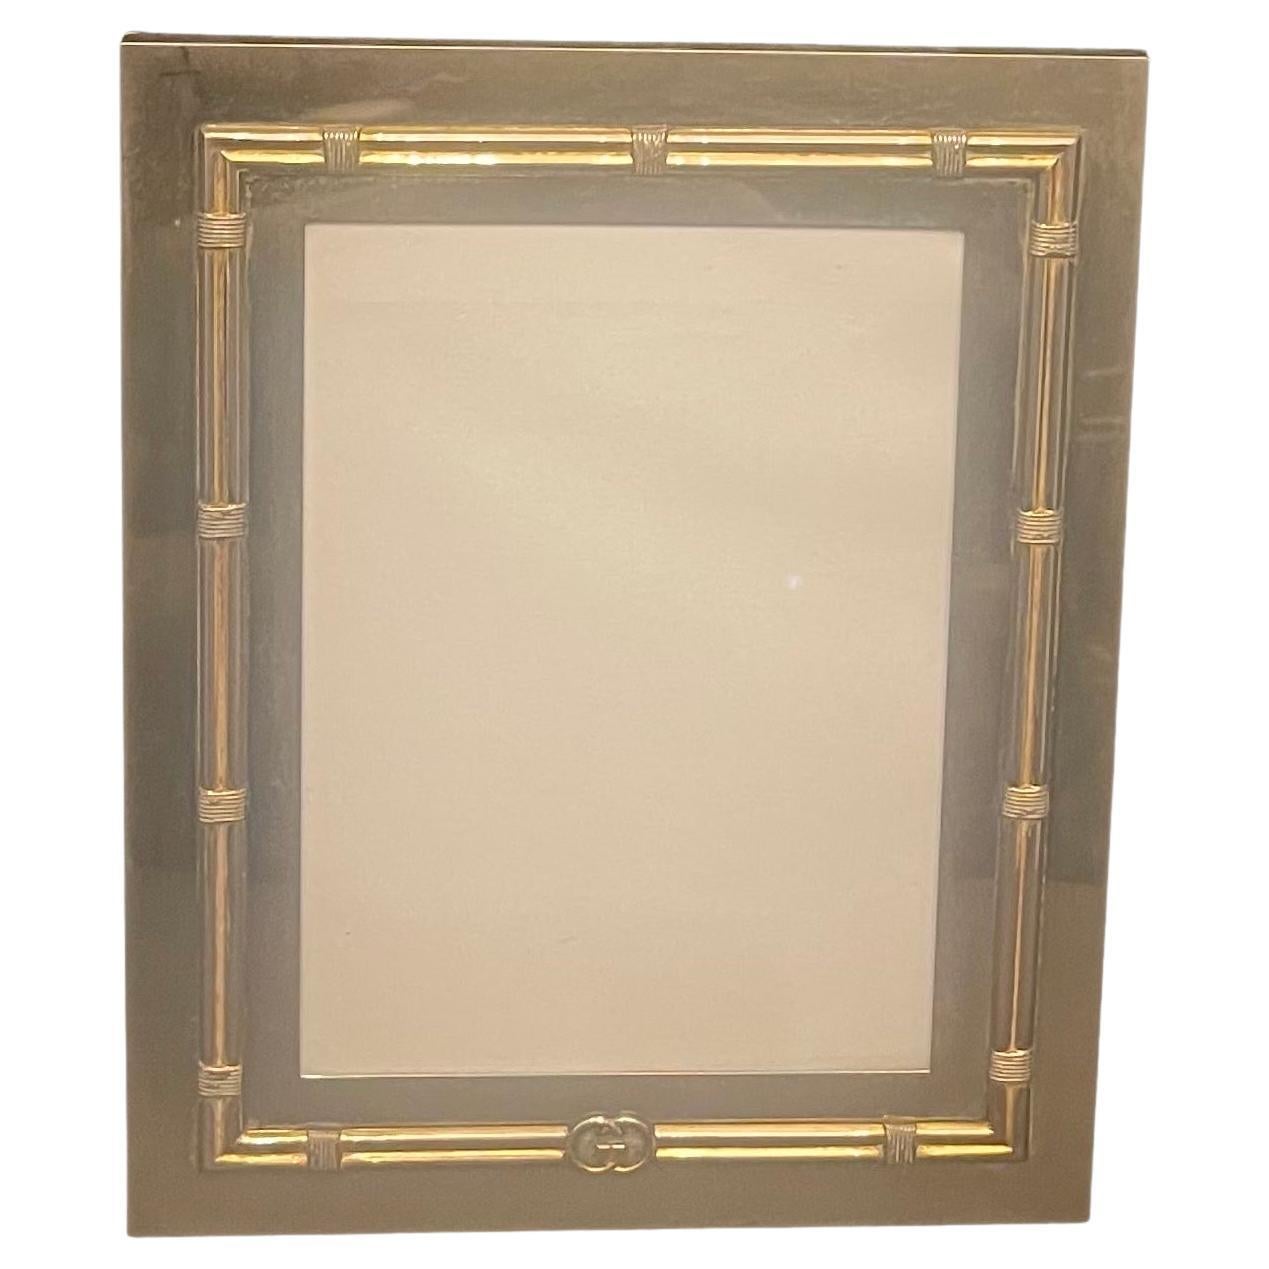 Wonderful Vintage Mid-Century Modern Gucci Silver Plate Picture Frame Wood Back For Sale